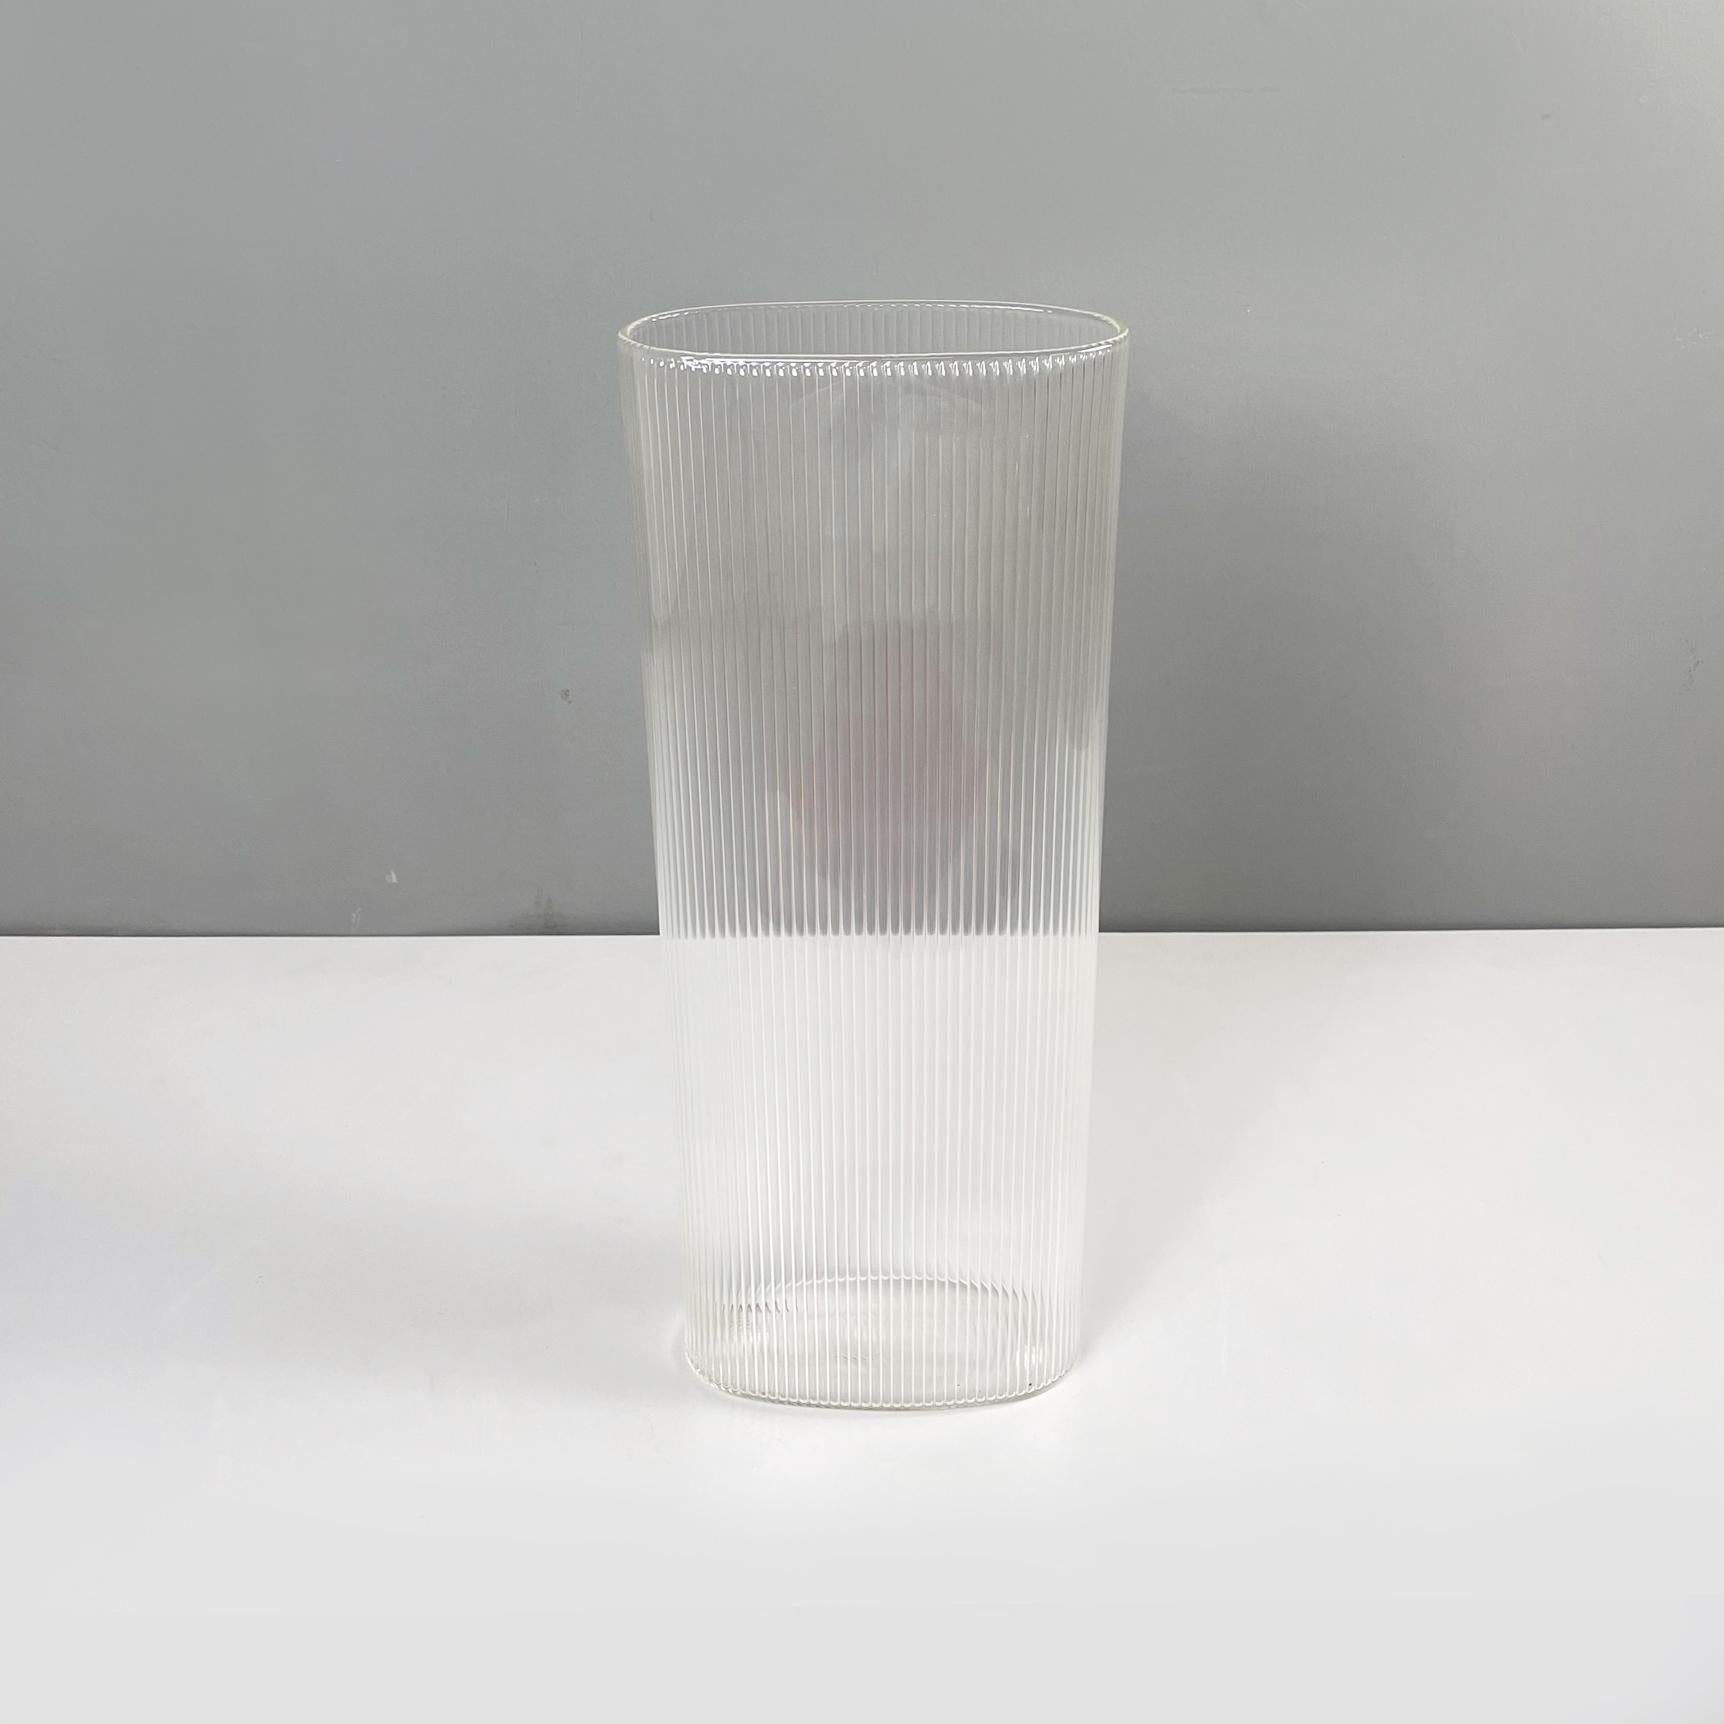 Italian modern Glass vase with oval shape by Roberto Faccioli, 1990s
Vase with oval base in finely handcrafted glass. The structure has thin decorative vertical lines.
Designed and produced by Roberto Faccioli in 1990s.
Very good condition.